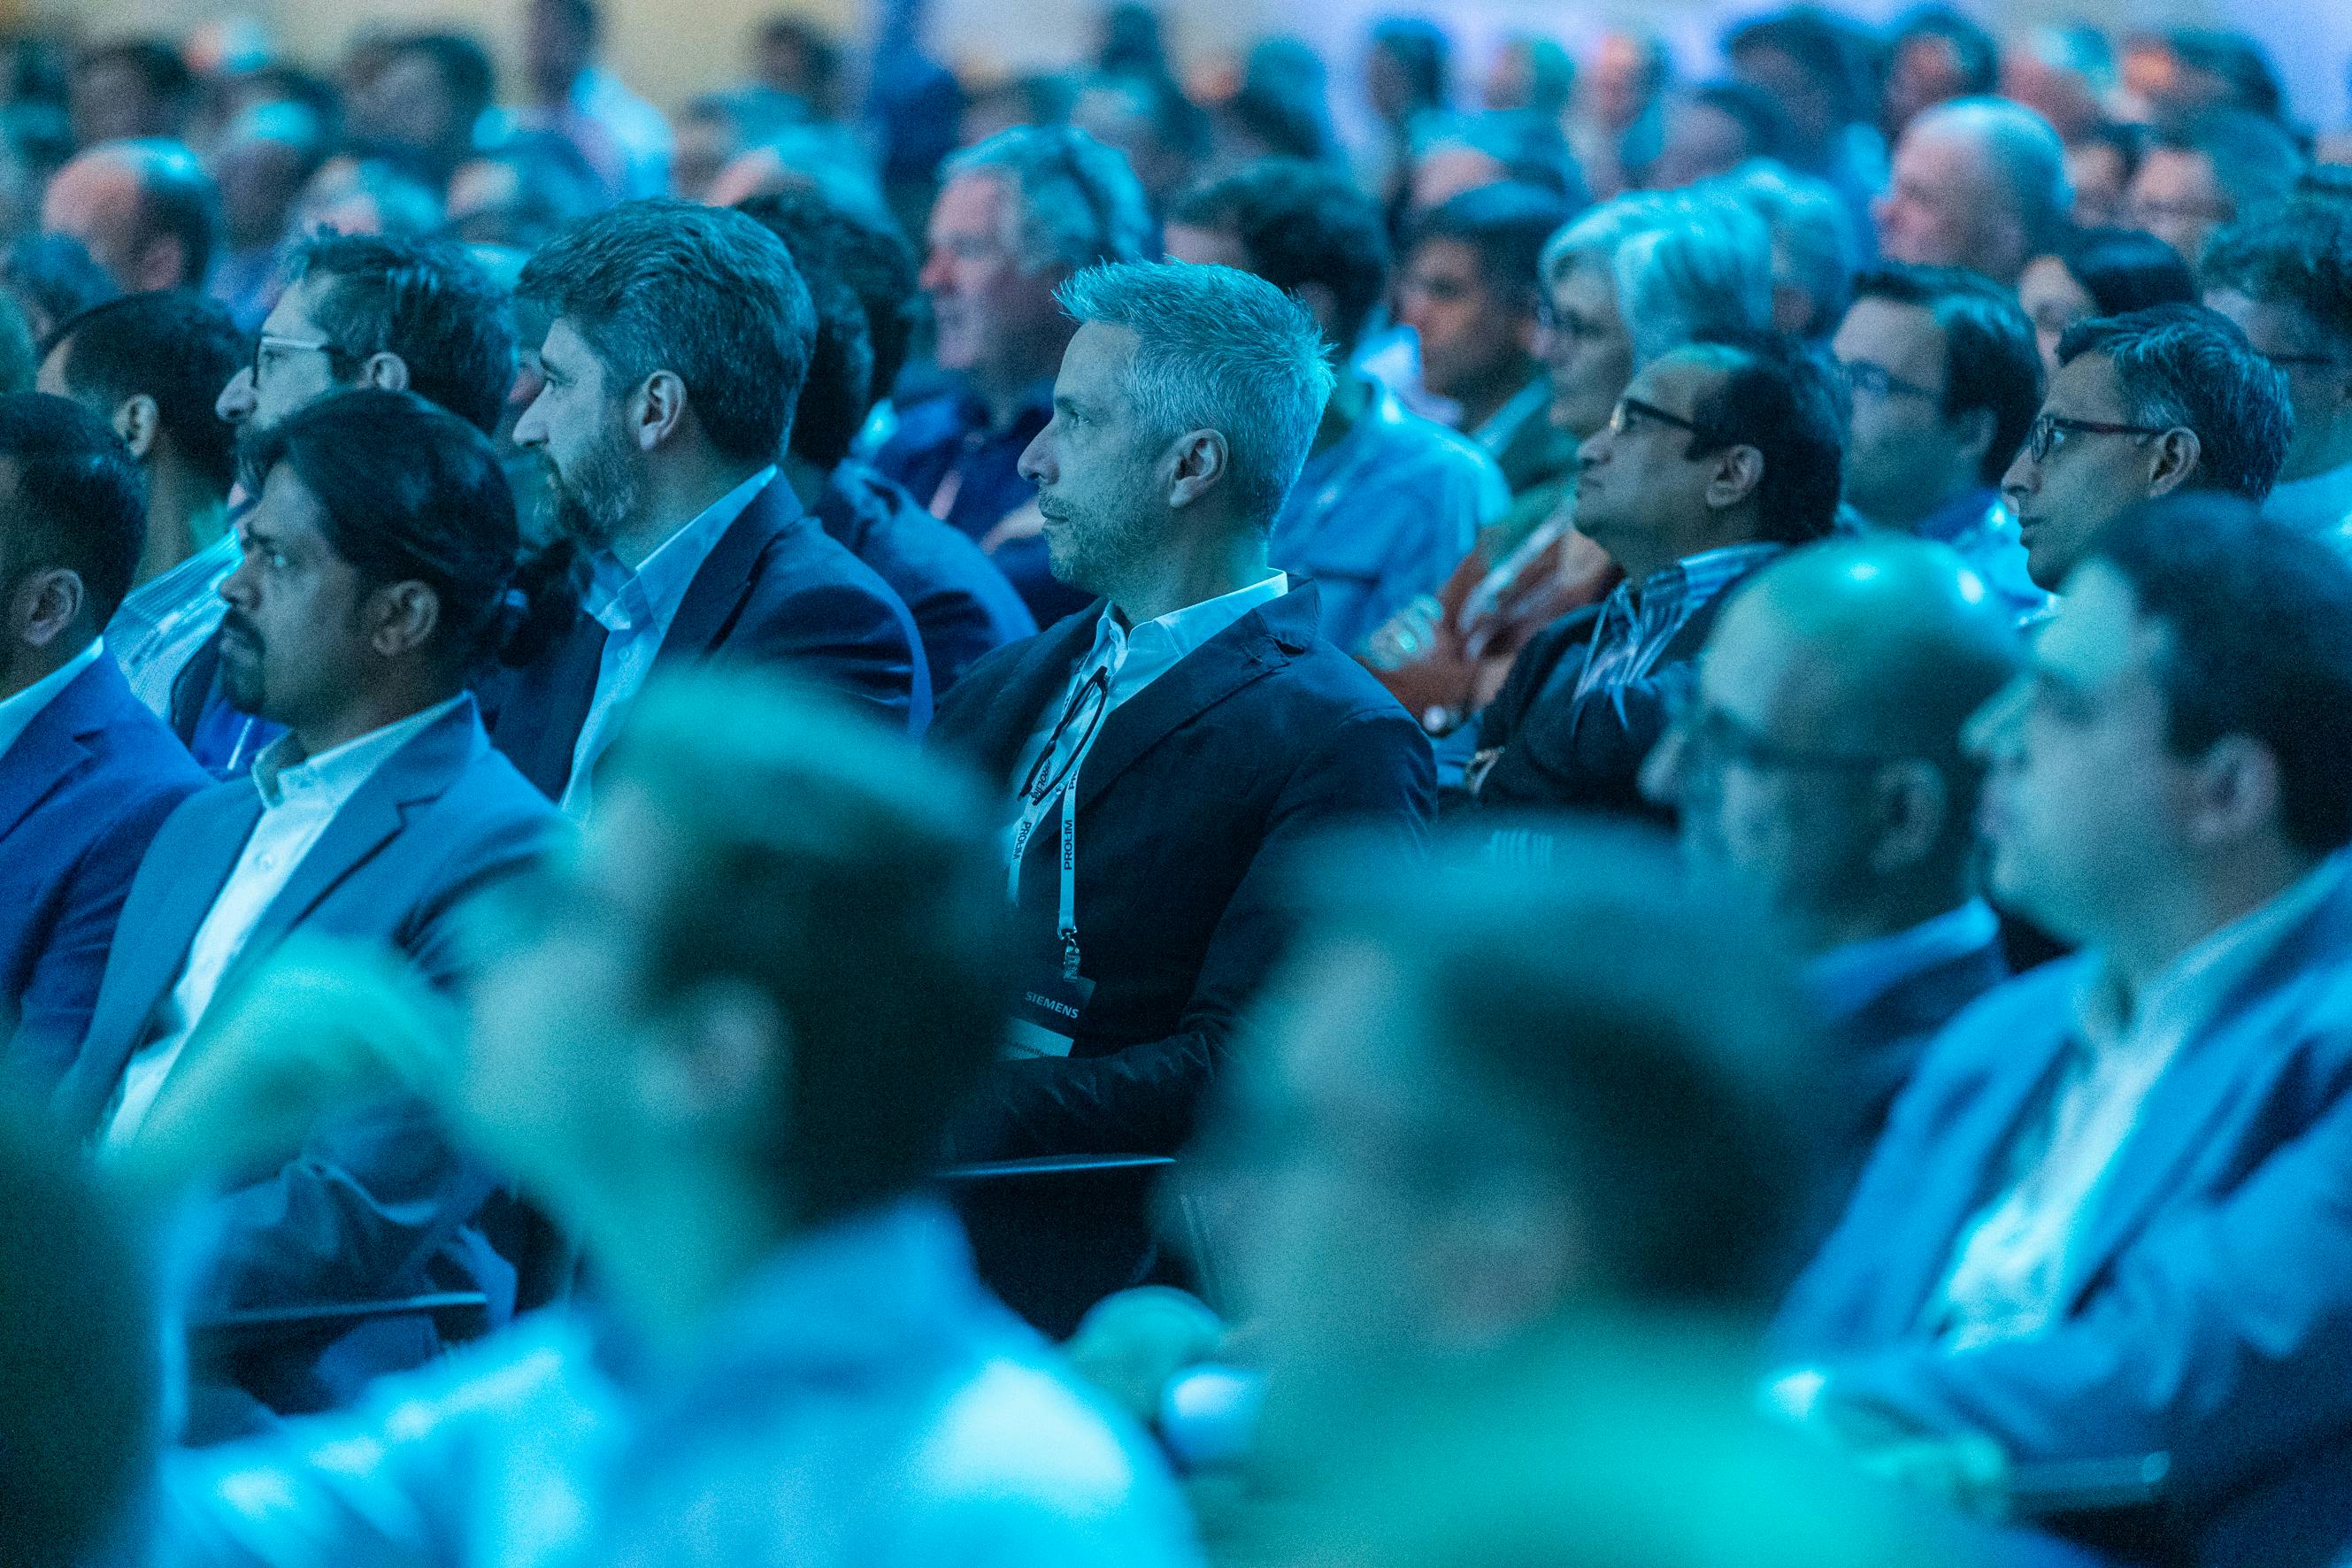 The audience is gaining insights on how Siemens solutions help solve our customers' problems at Realize LIVE Europe 2022